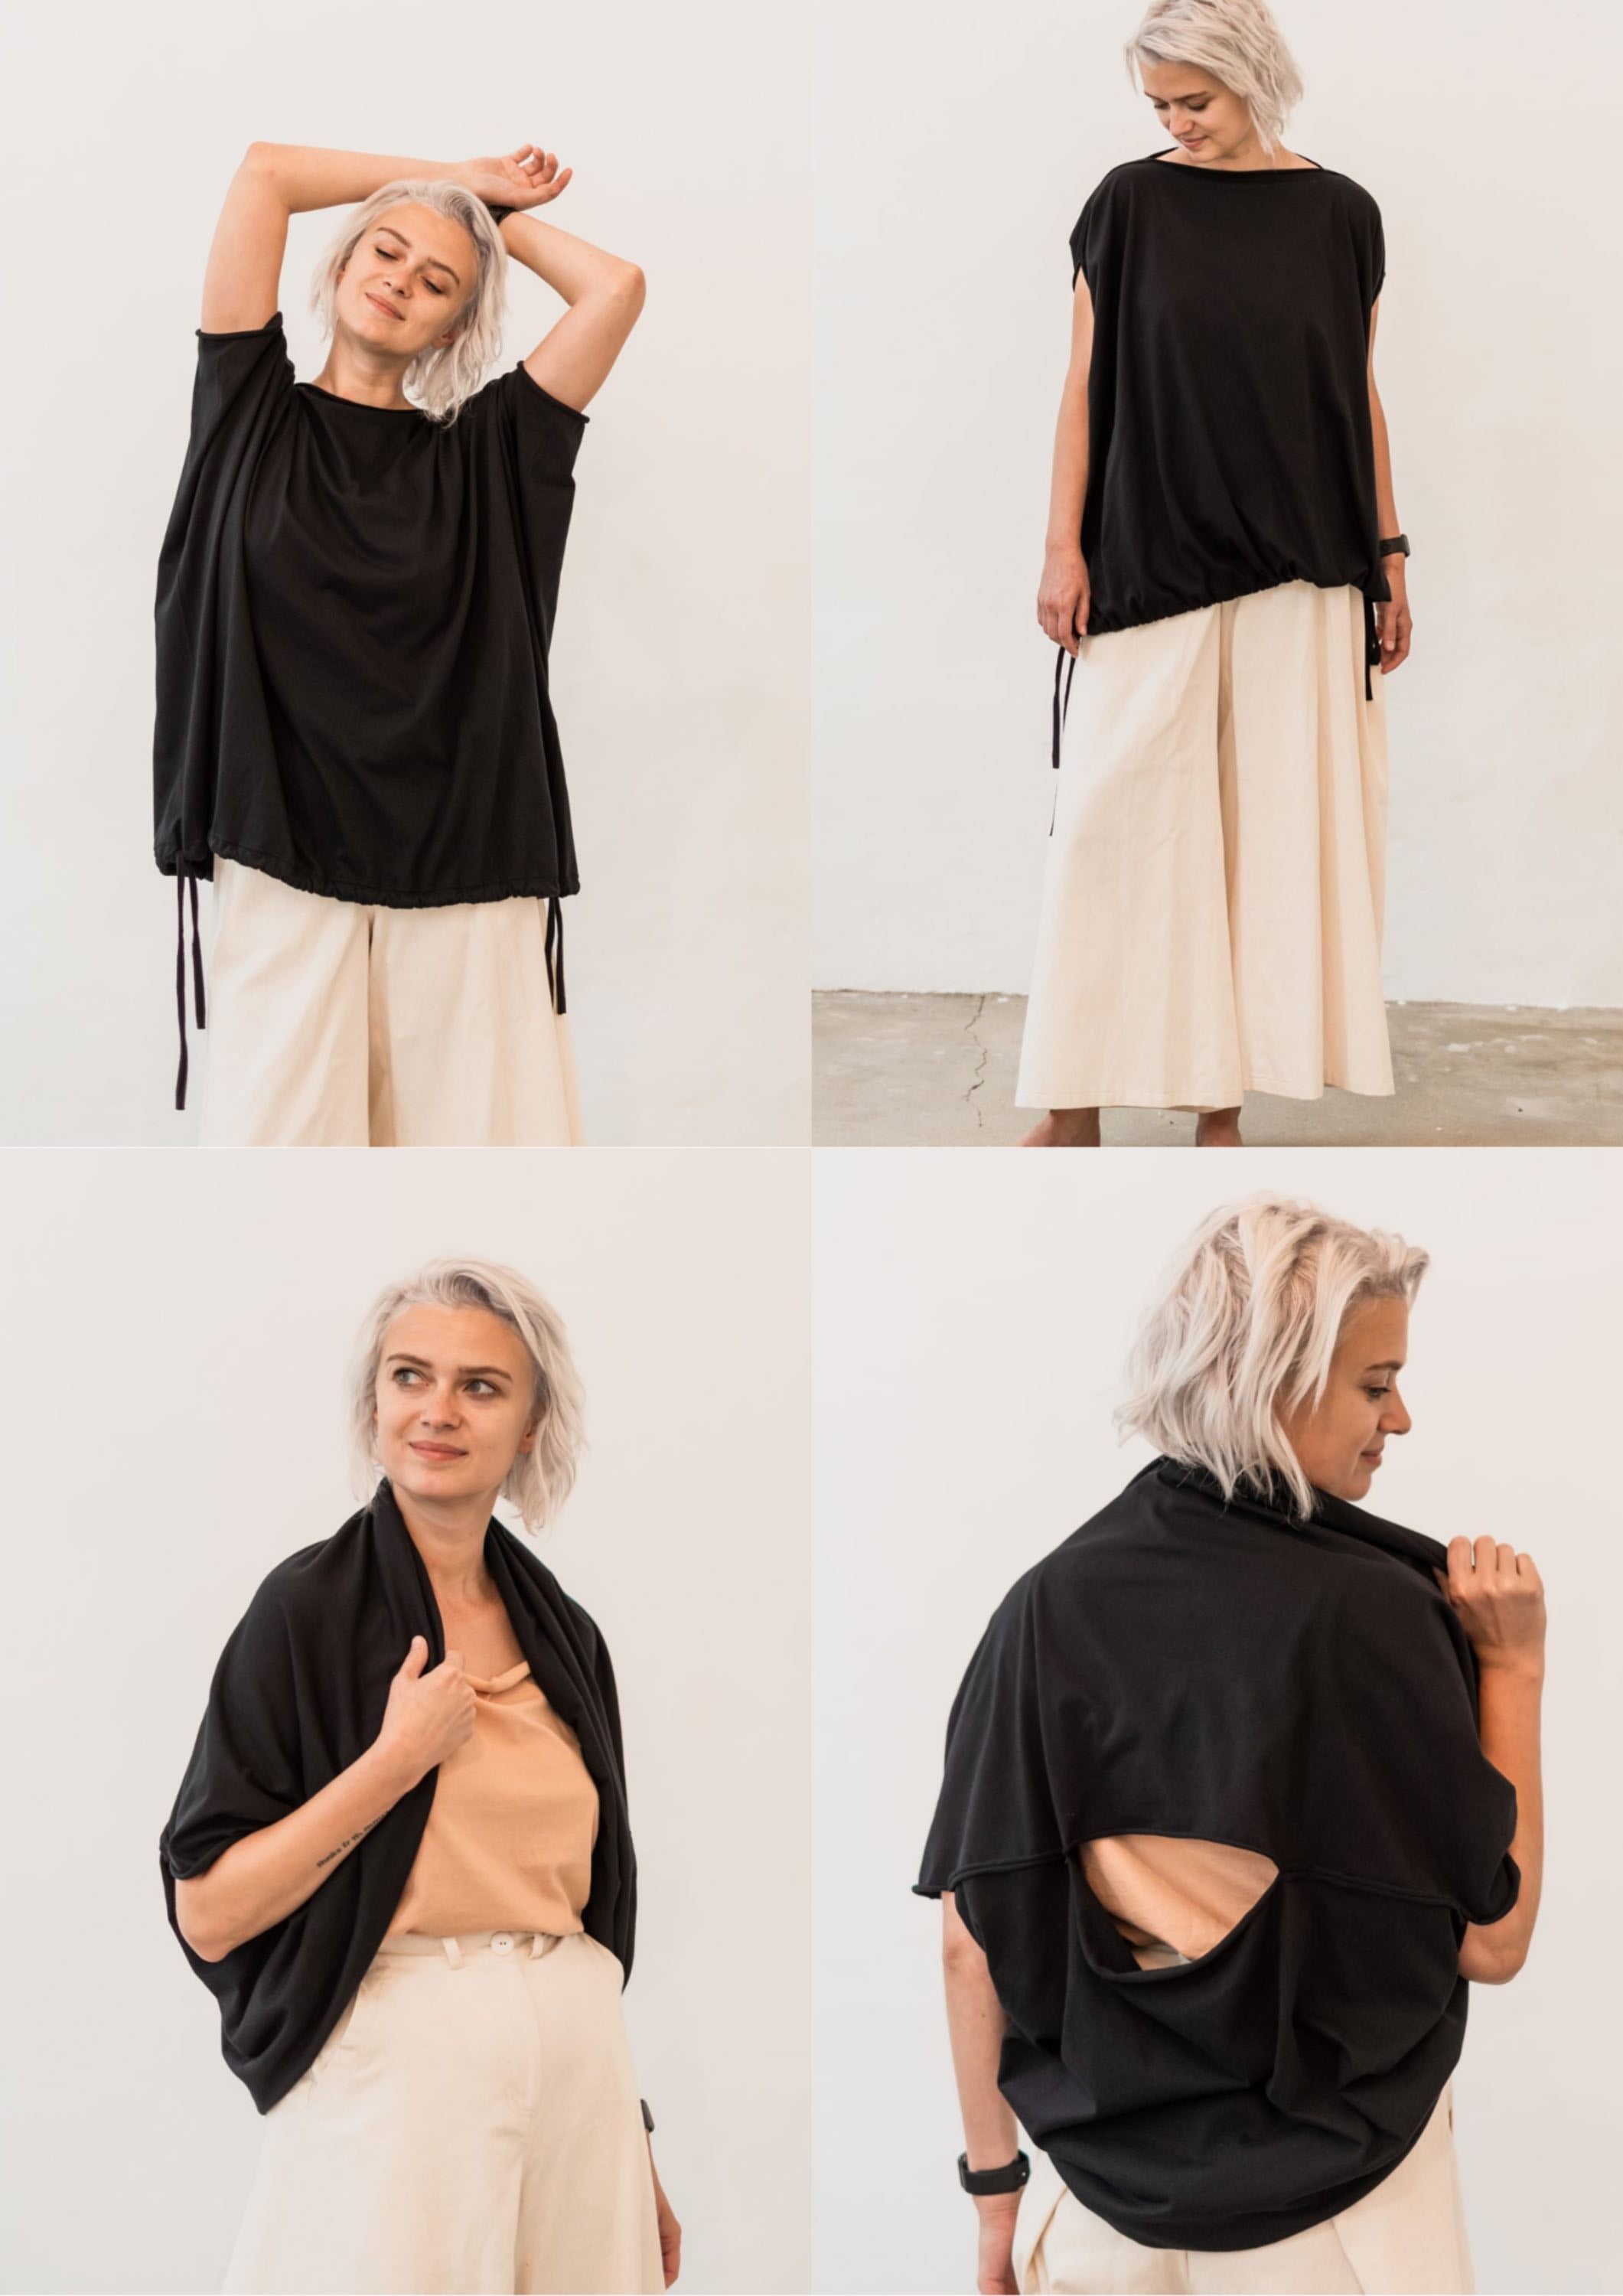 Multifunctional black fluid jersey, made from 100% organic cotton. Can be worn as a blouse, vest or poncho. With two sided adjustable drawn strings. 